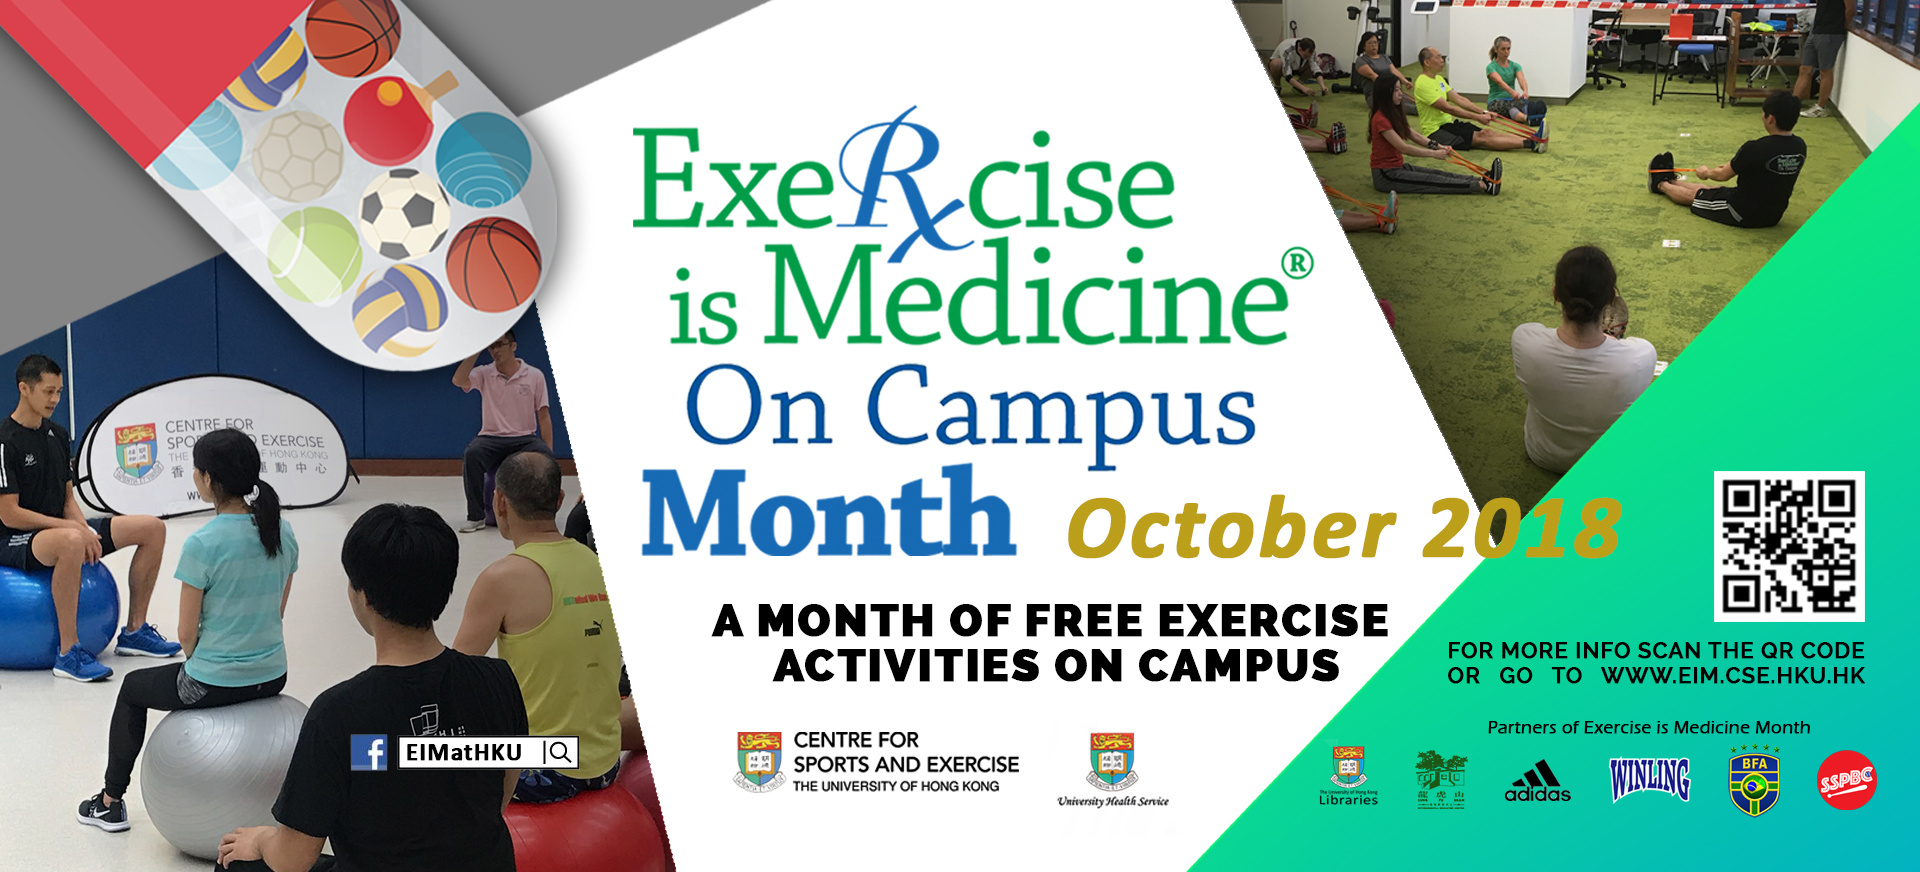 Exercise is Medicine on Campus - October 2018